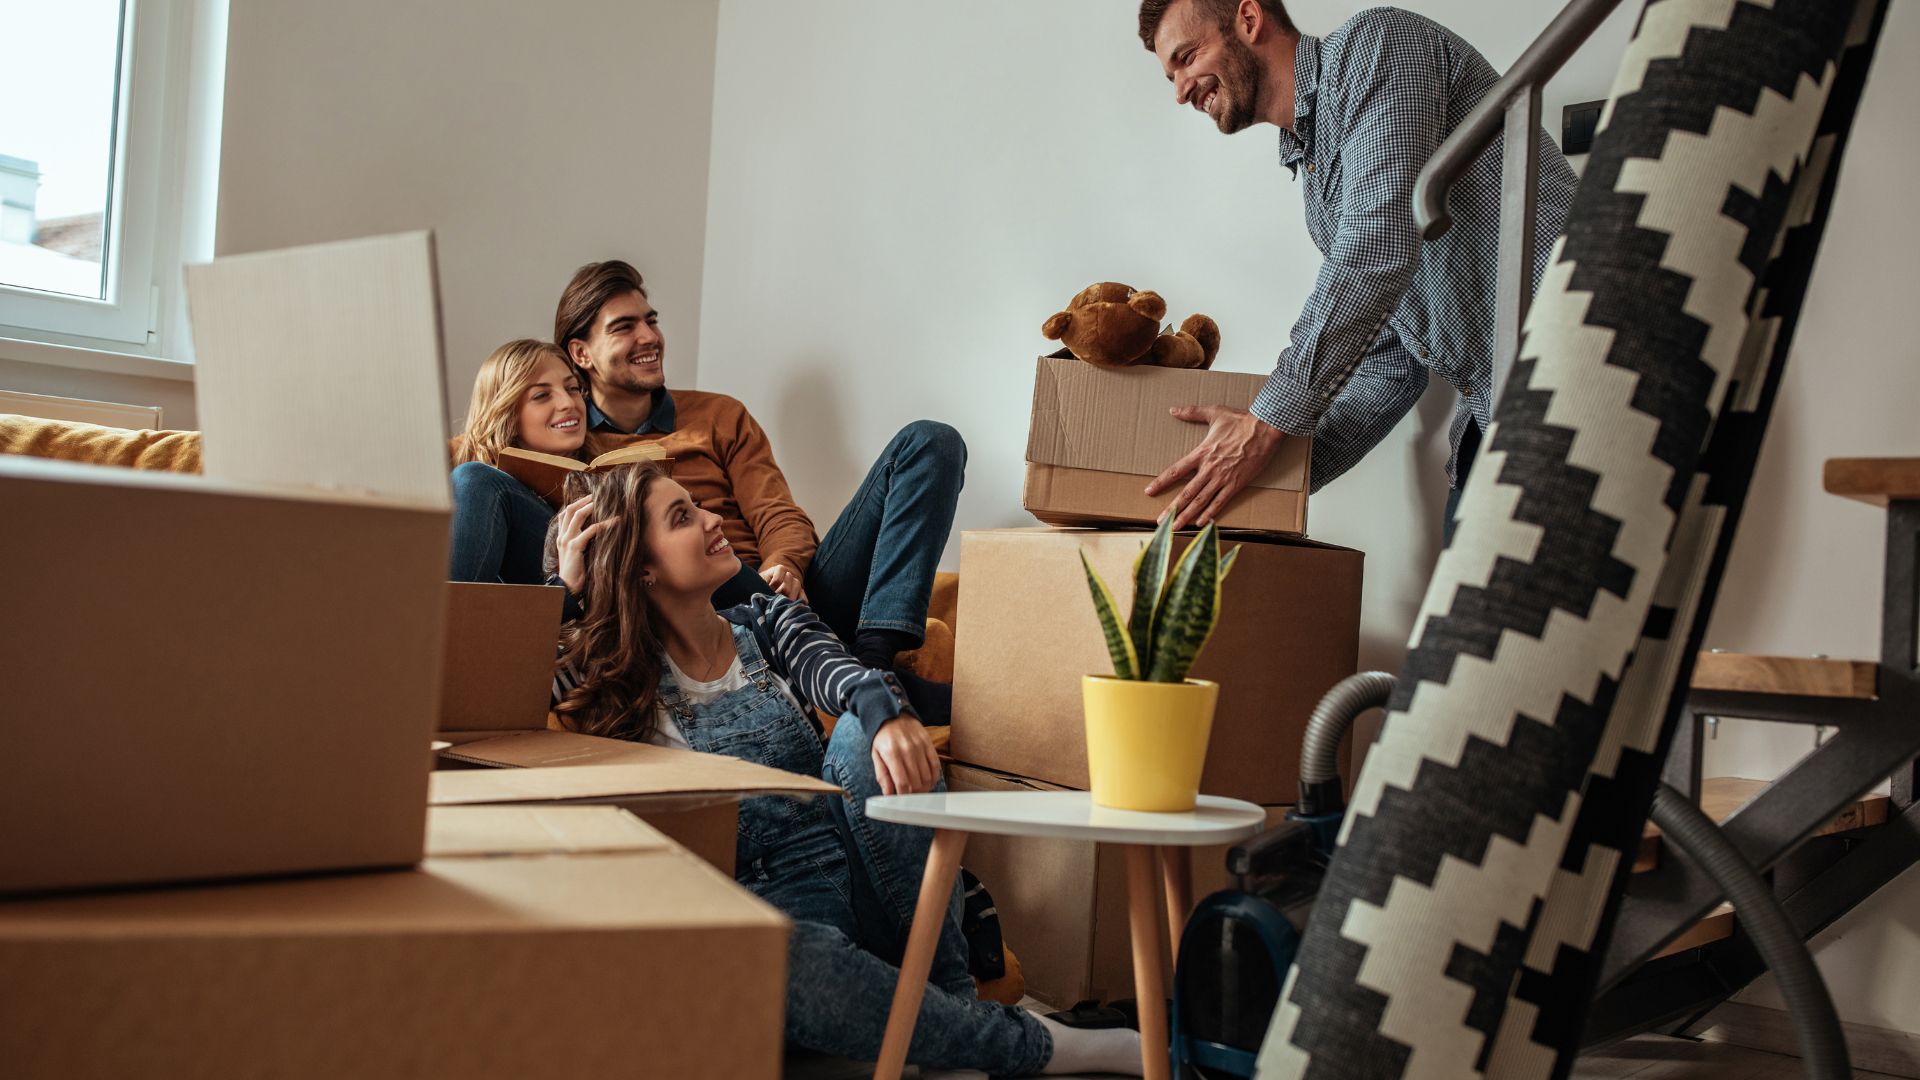 Image of a family surrounded by boxes, smiling